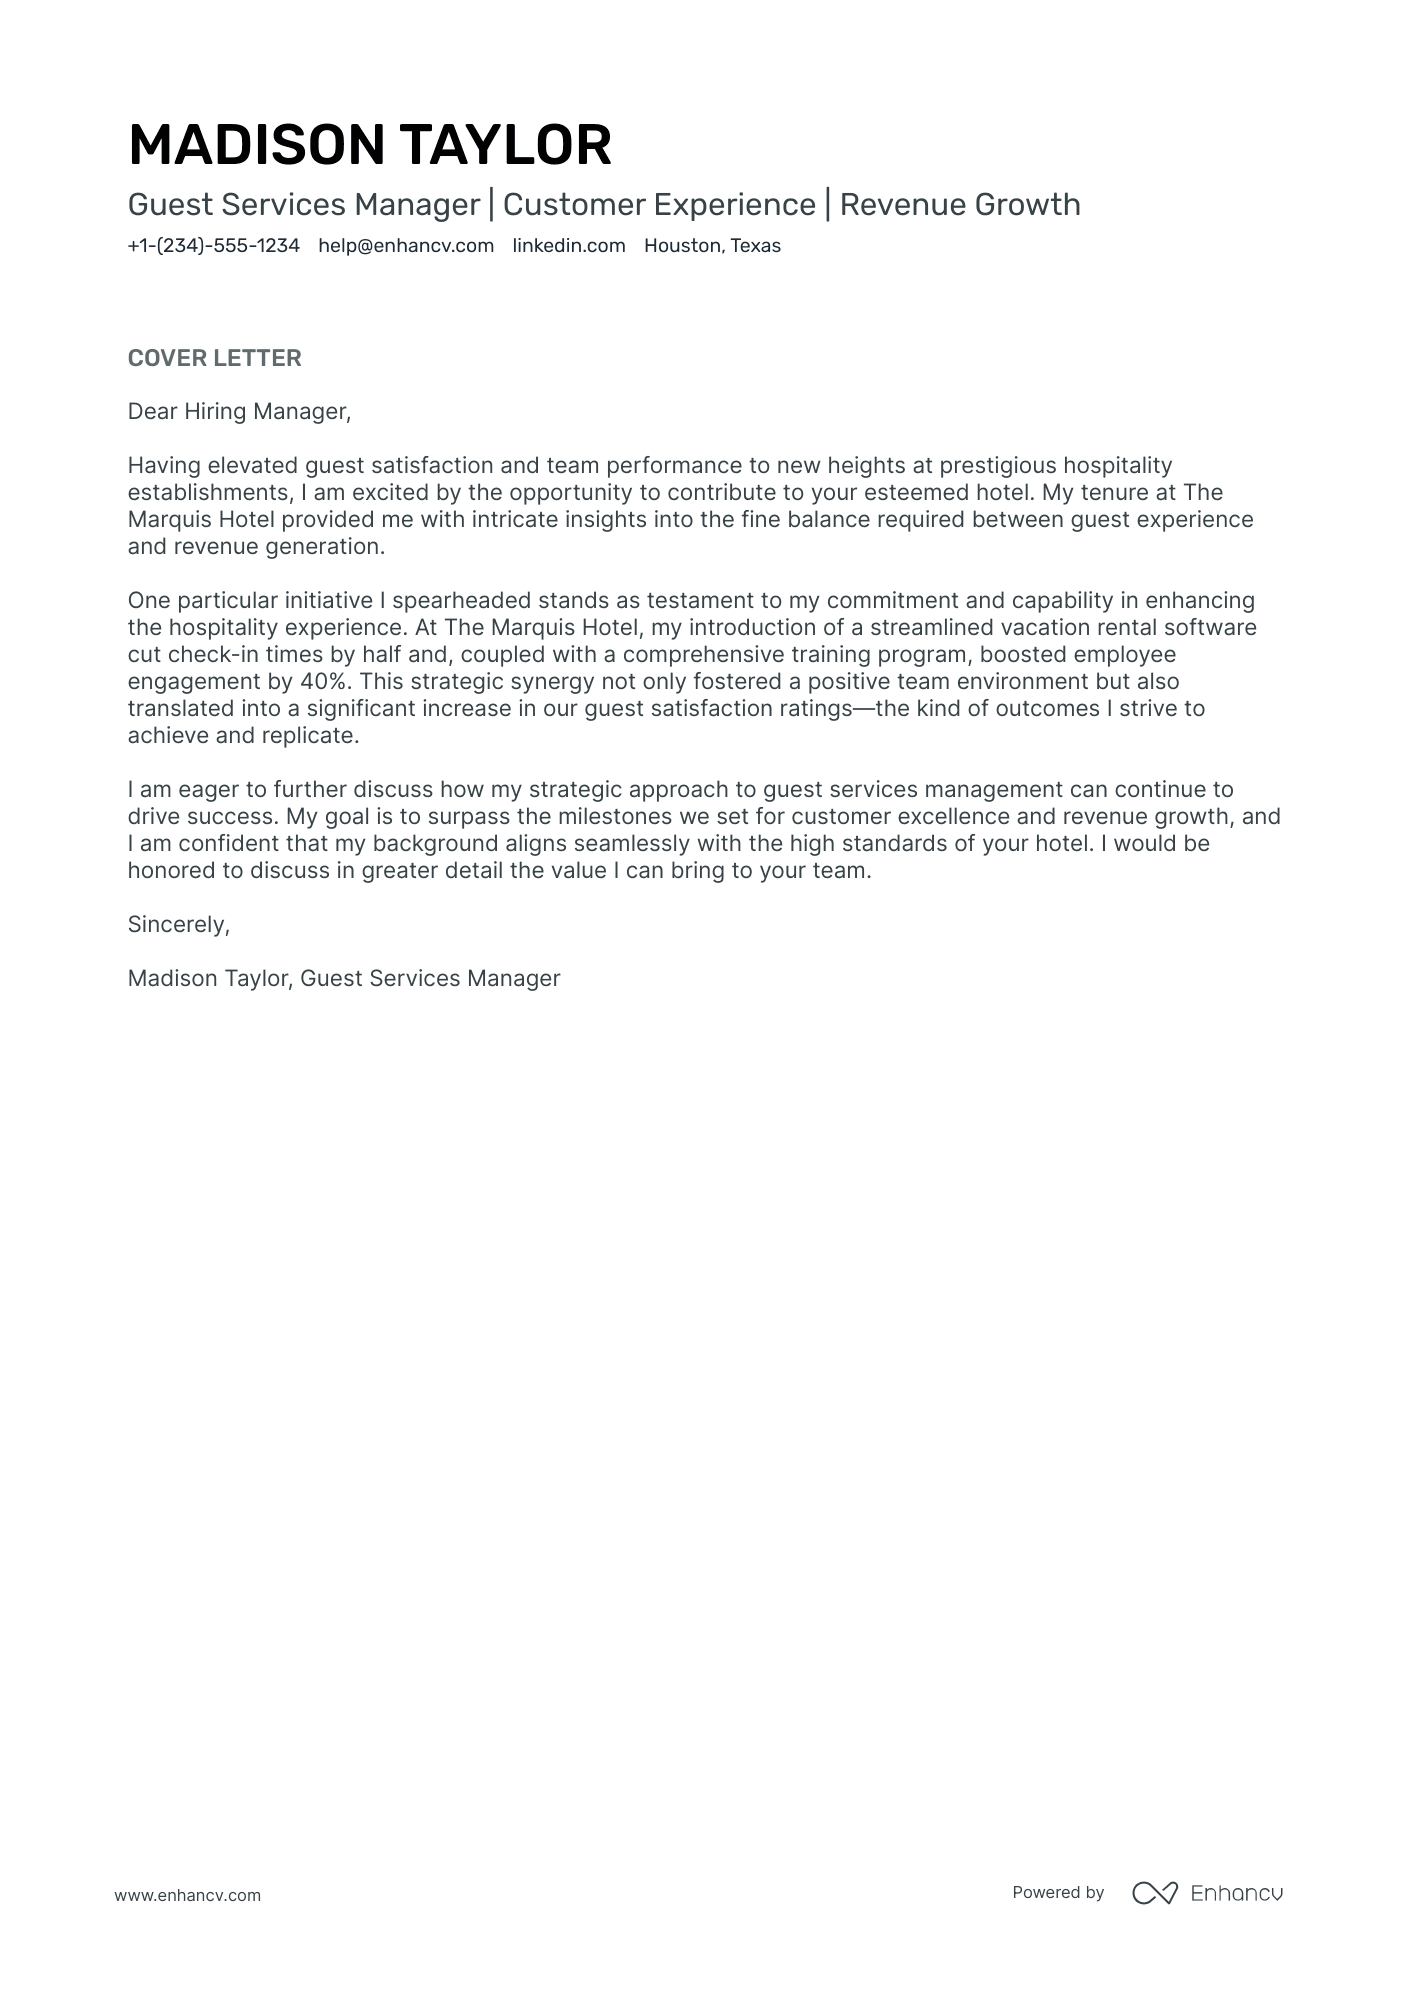 Guest Services Manager cover letter